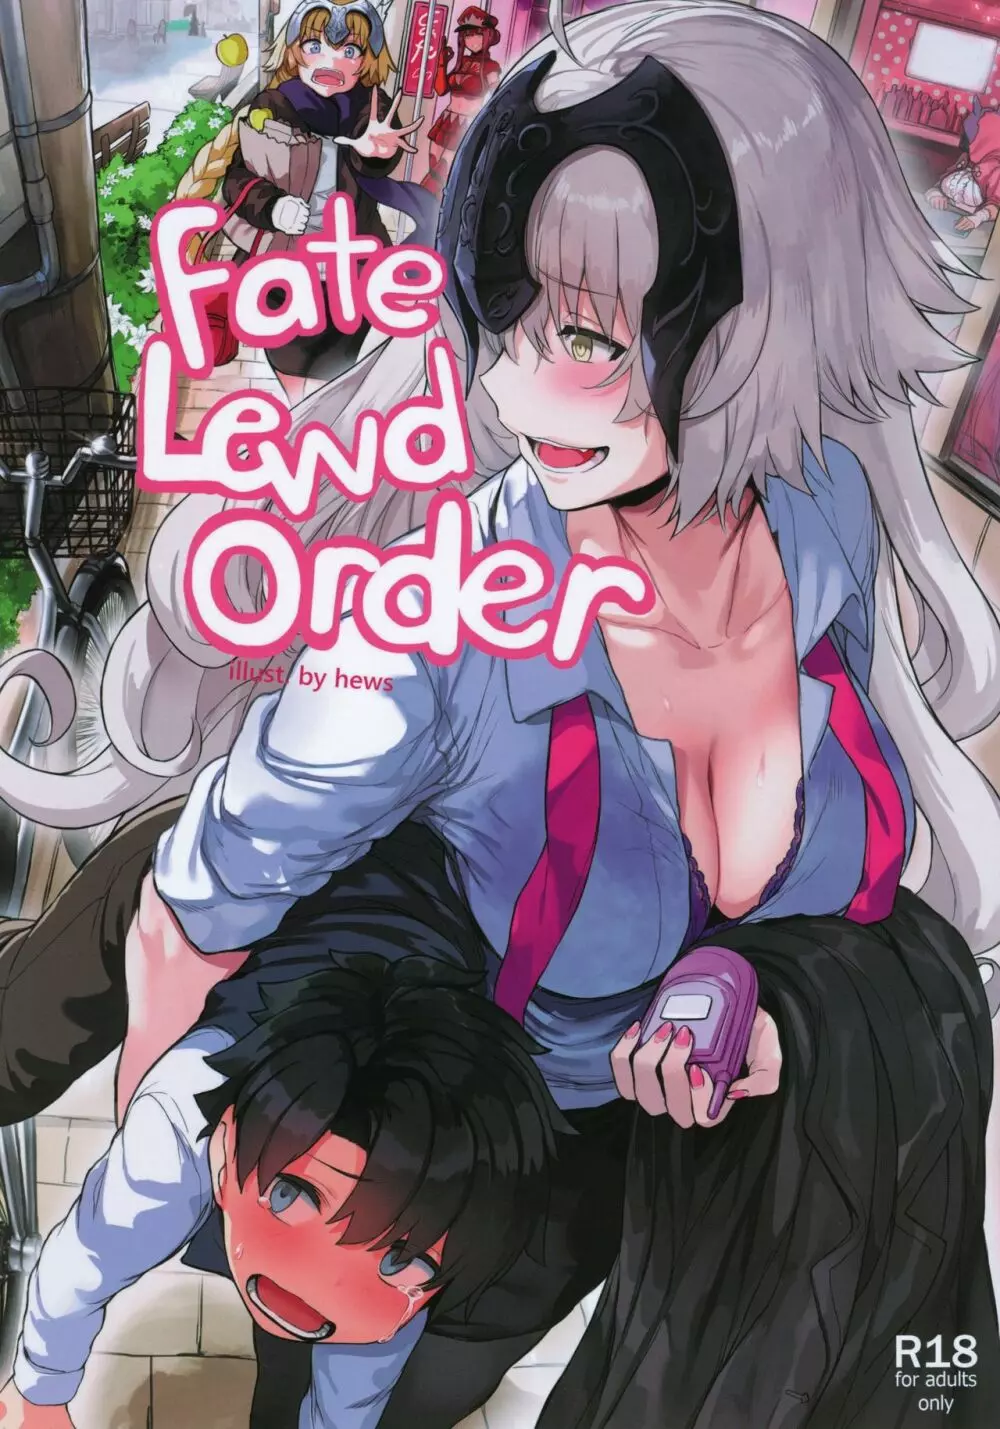 Fate Lewd Order - page1